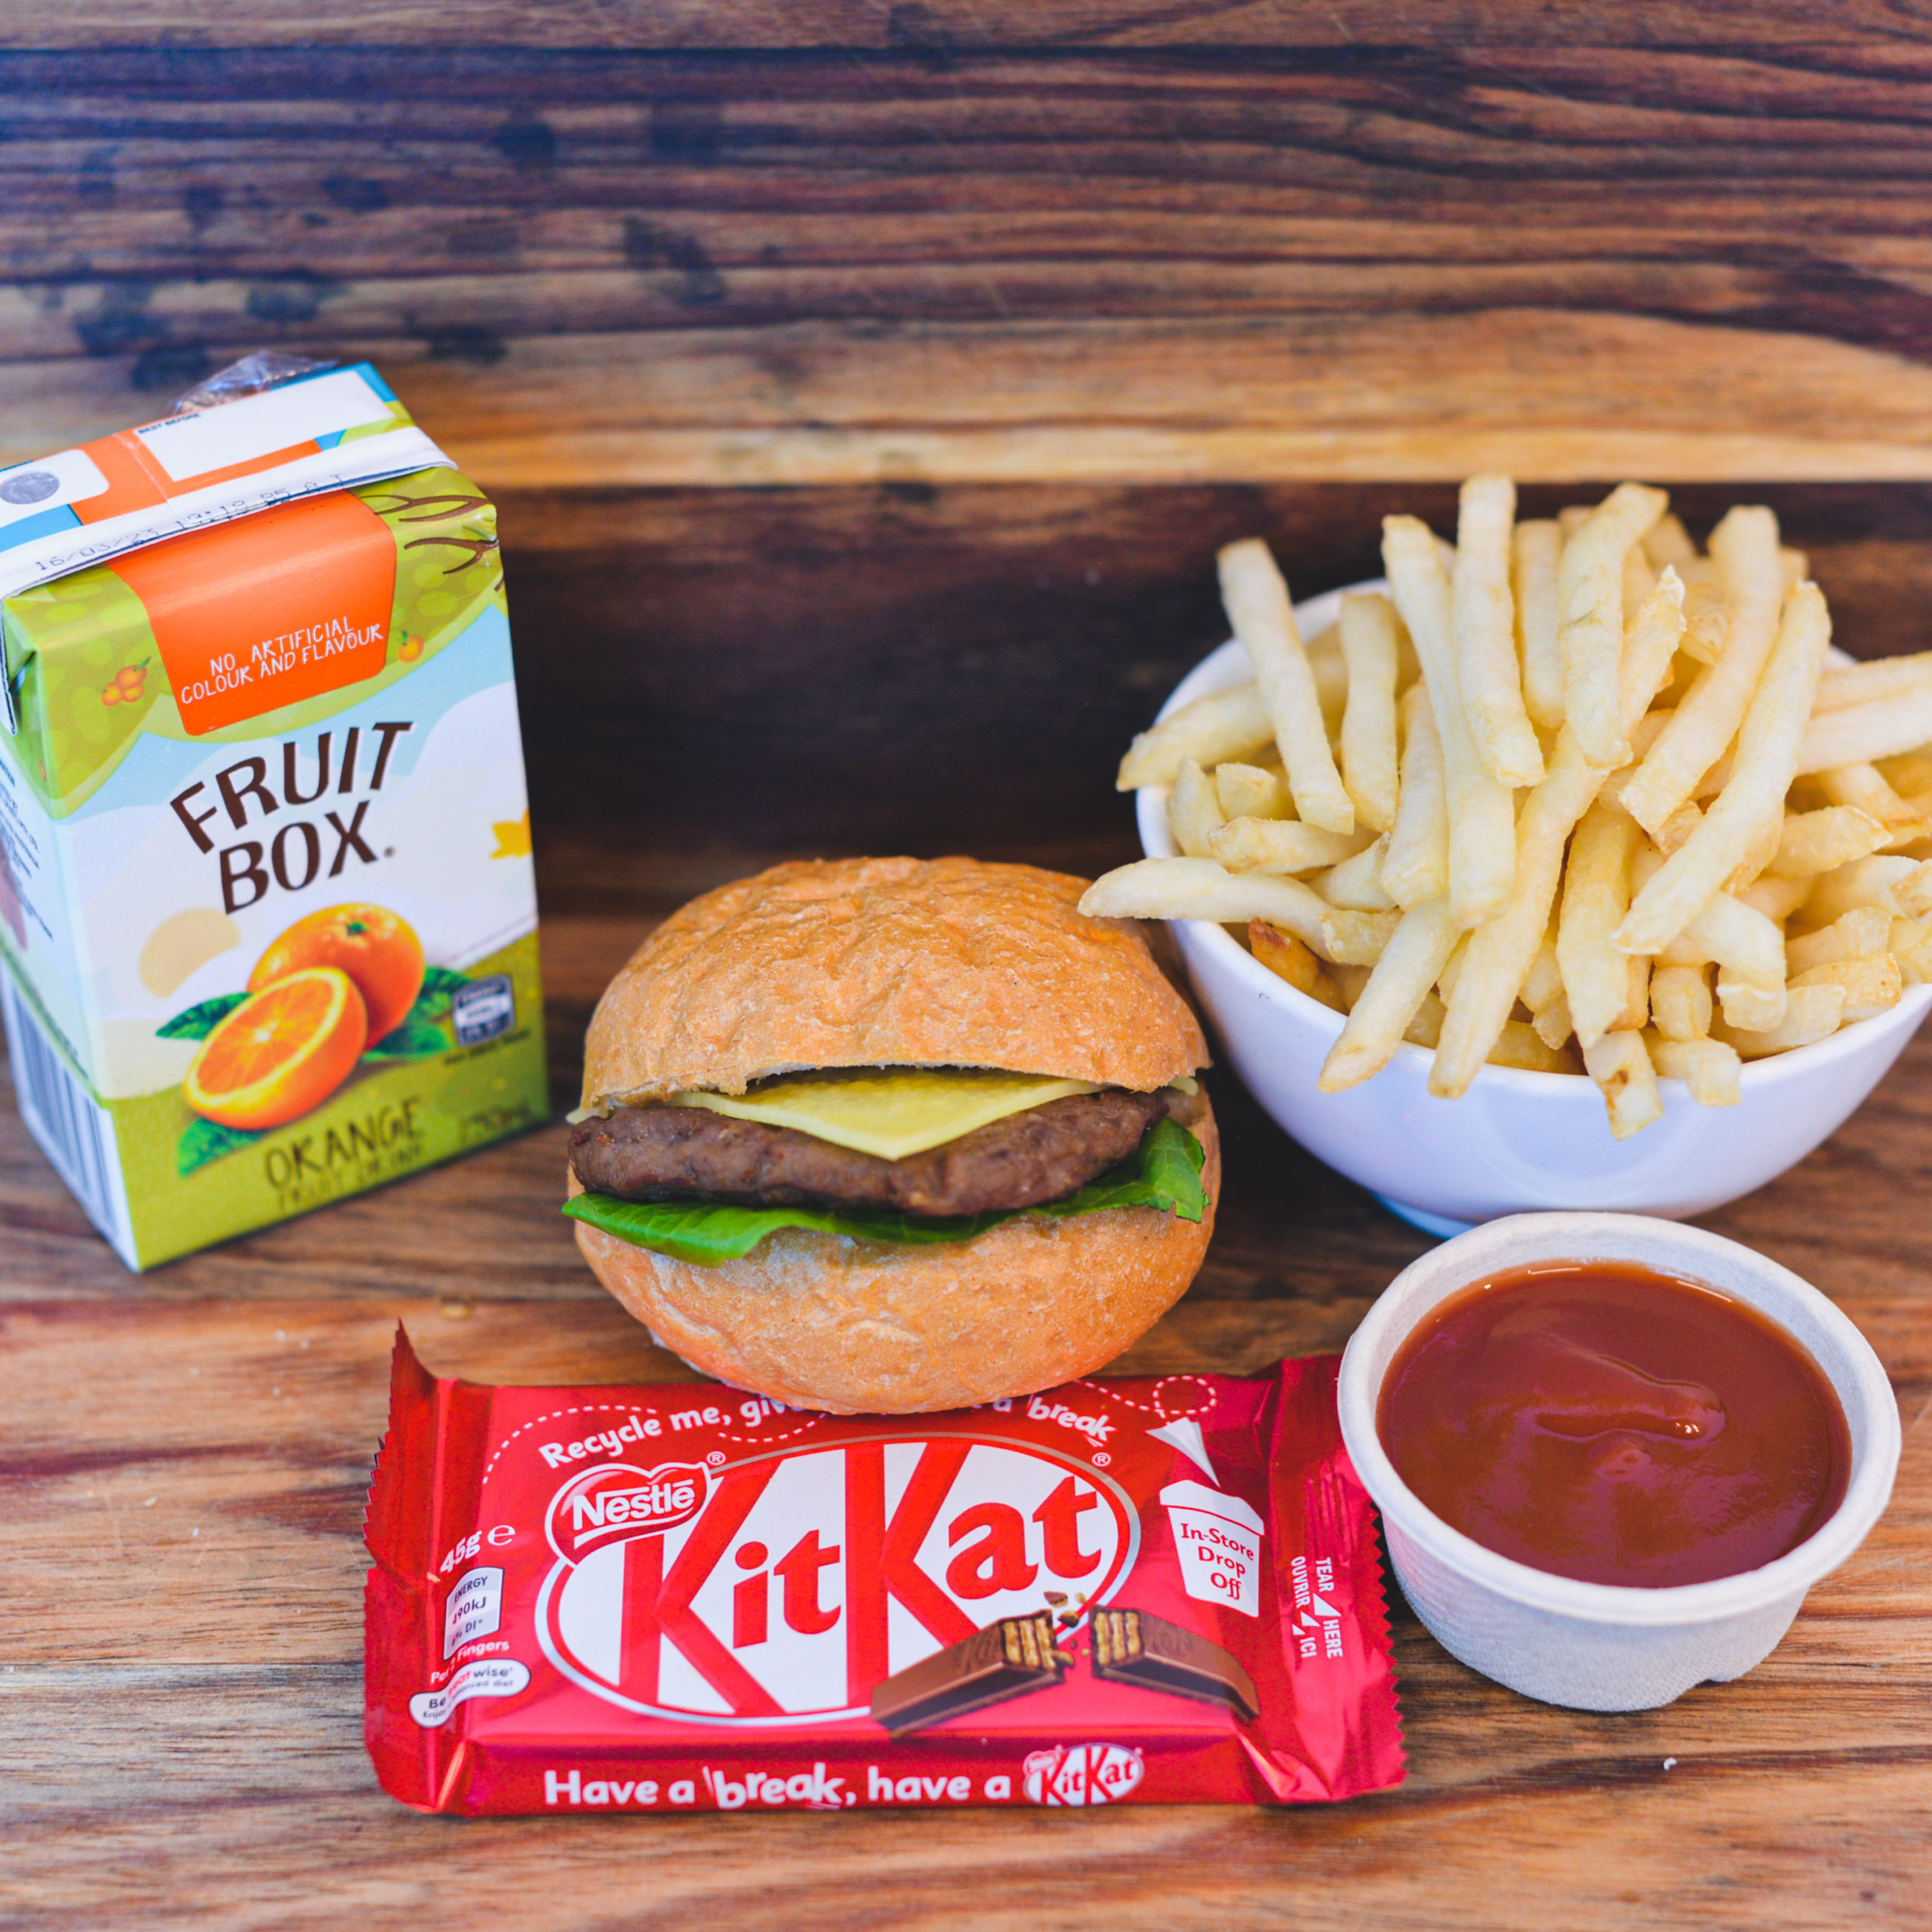 Cheese Burger, Large French Fries, sauce, chocolate bar and juice ($50.00)